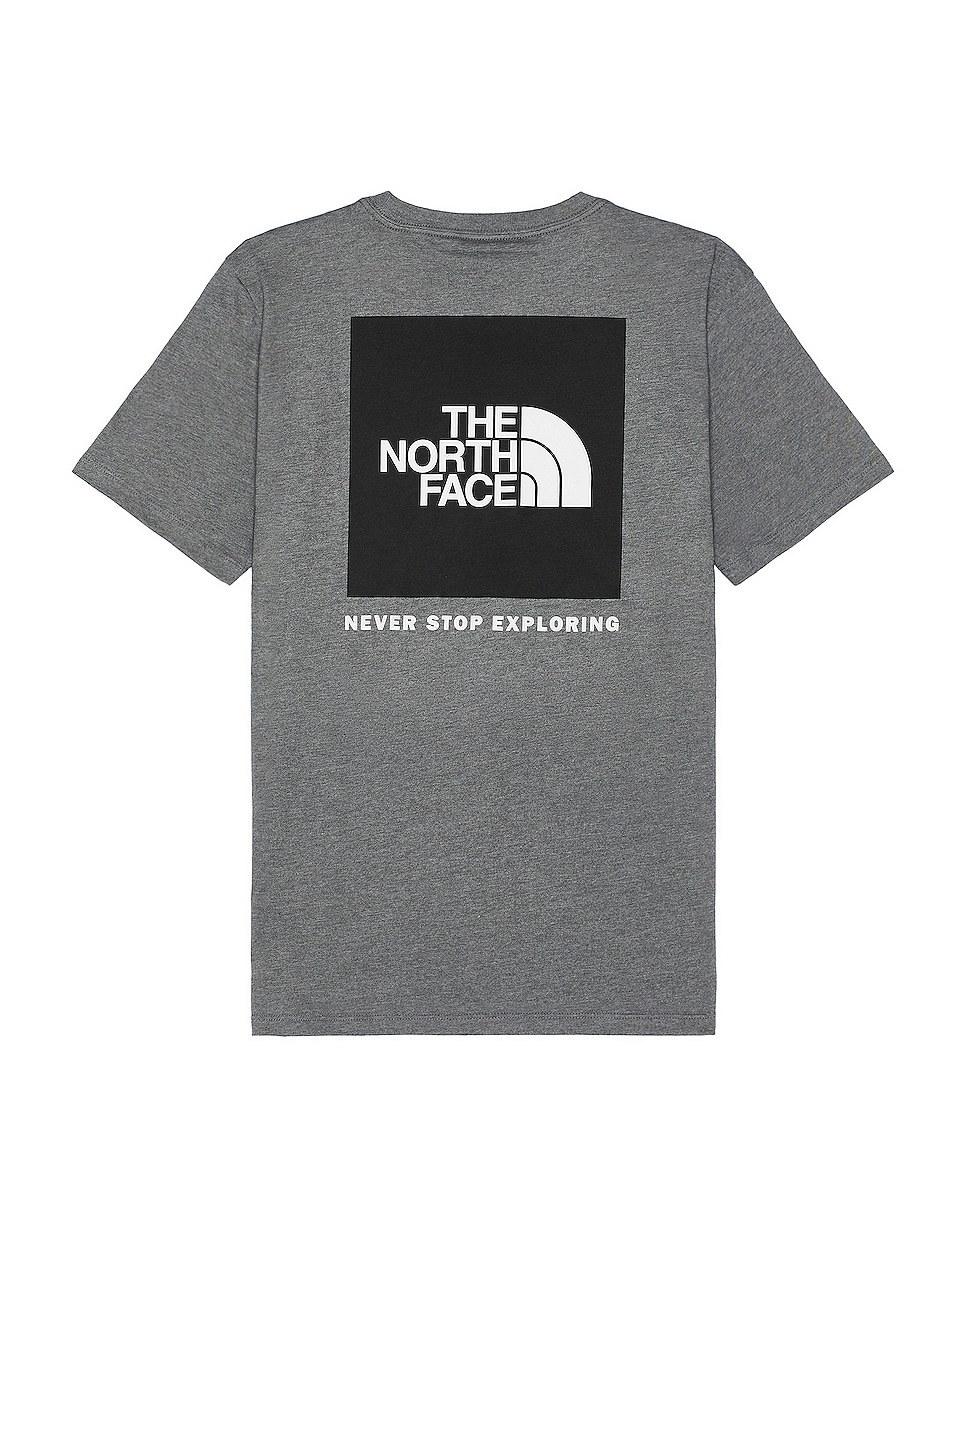 Image 1 of The North Face Box Nse Tee in Tnf Medium Grey Heather & Tnf Black